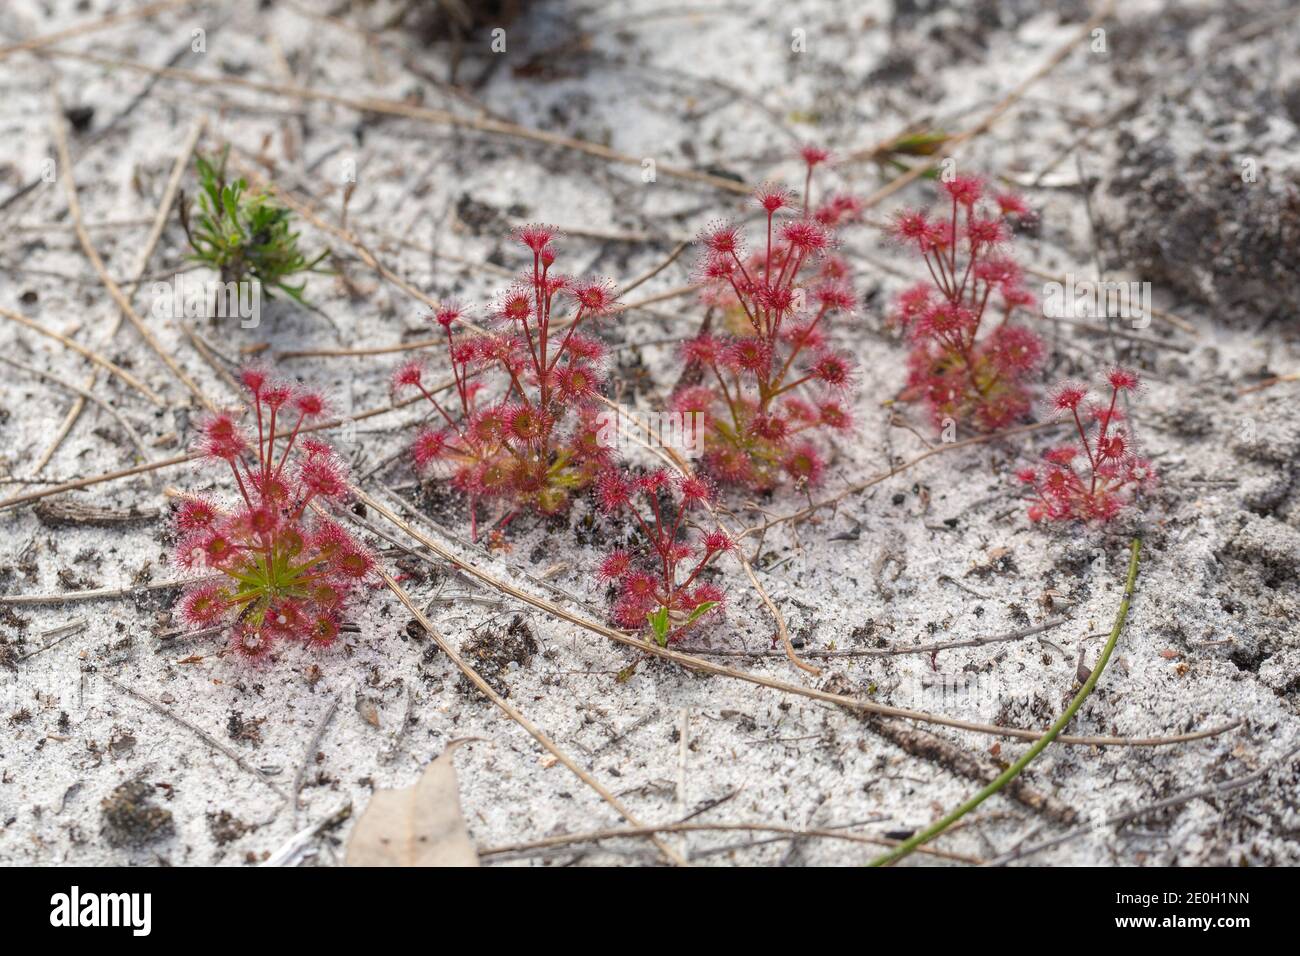 nice group of Drosera purpurascens (a carnivorous plant from the Sundew family) growing in natural habitat close to Darradup in Western Australia Stock Photo